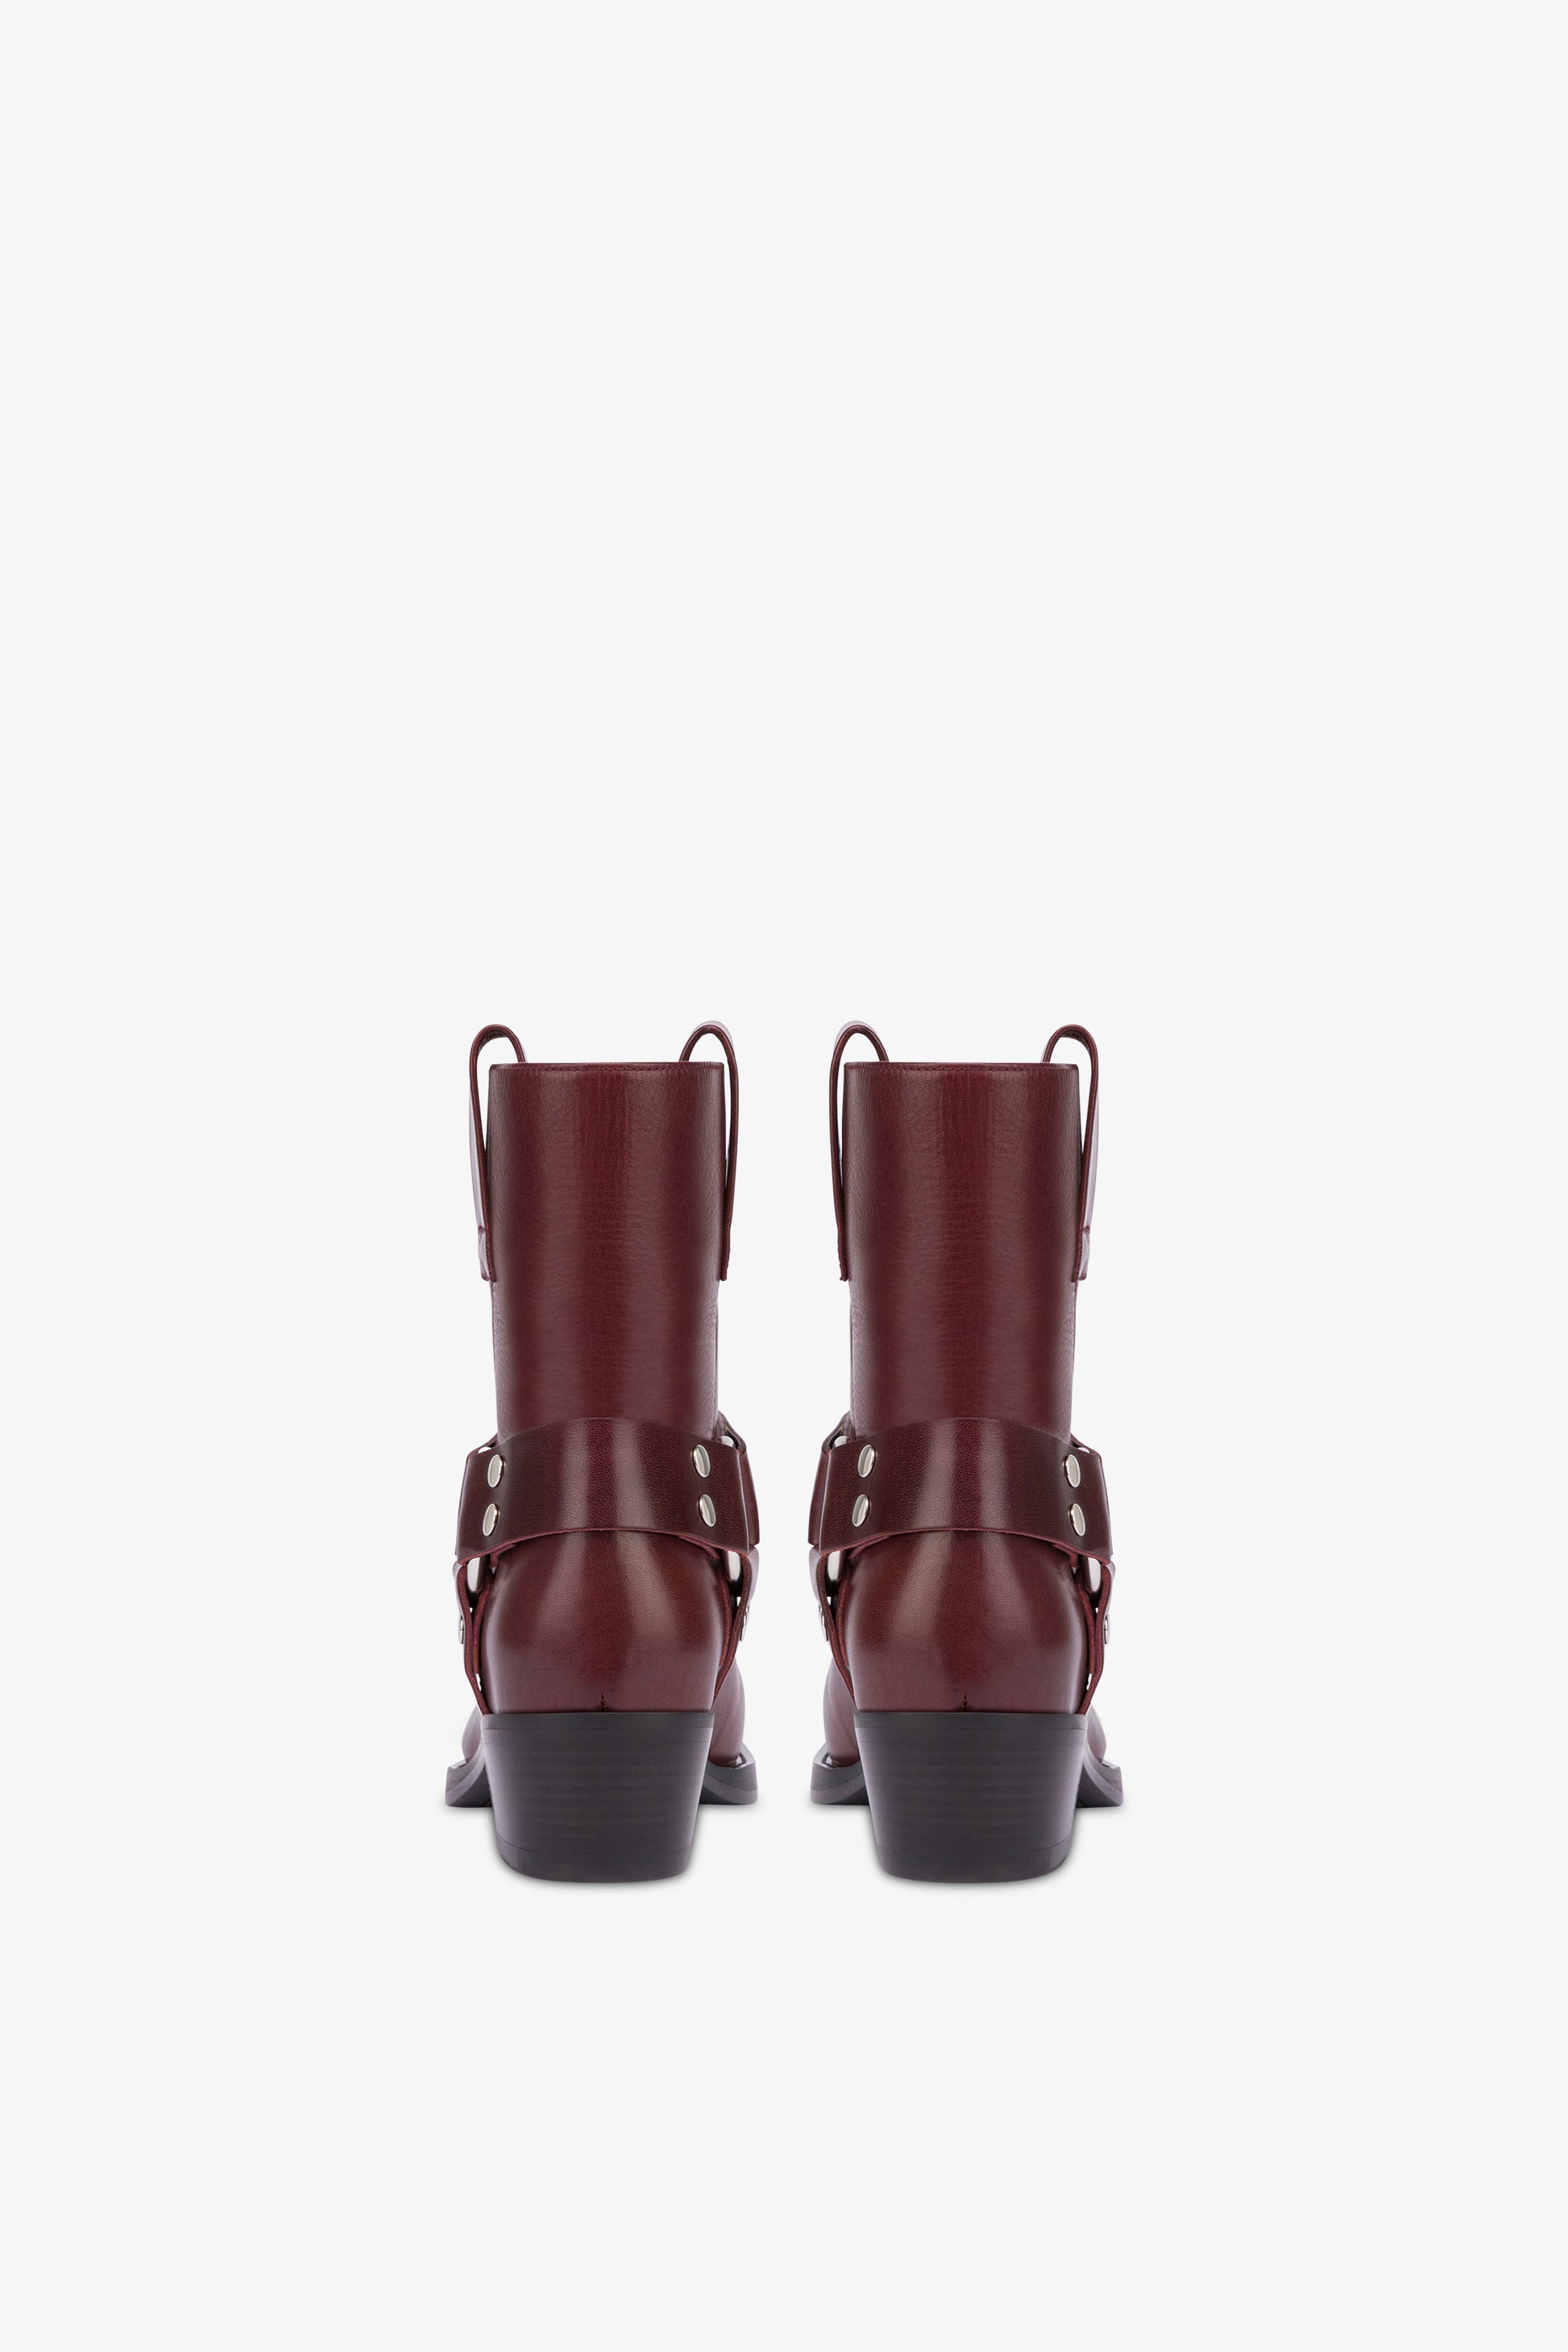 Square-toe ankle boots in soft plum leather